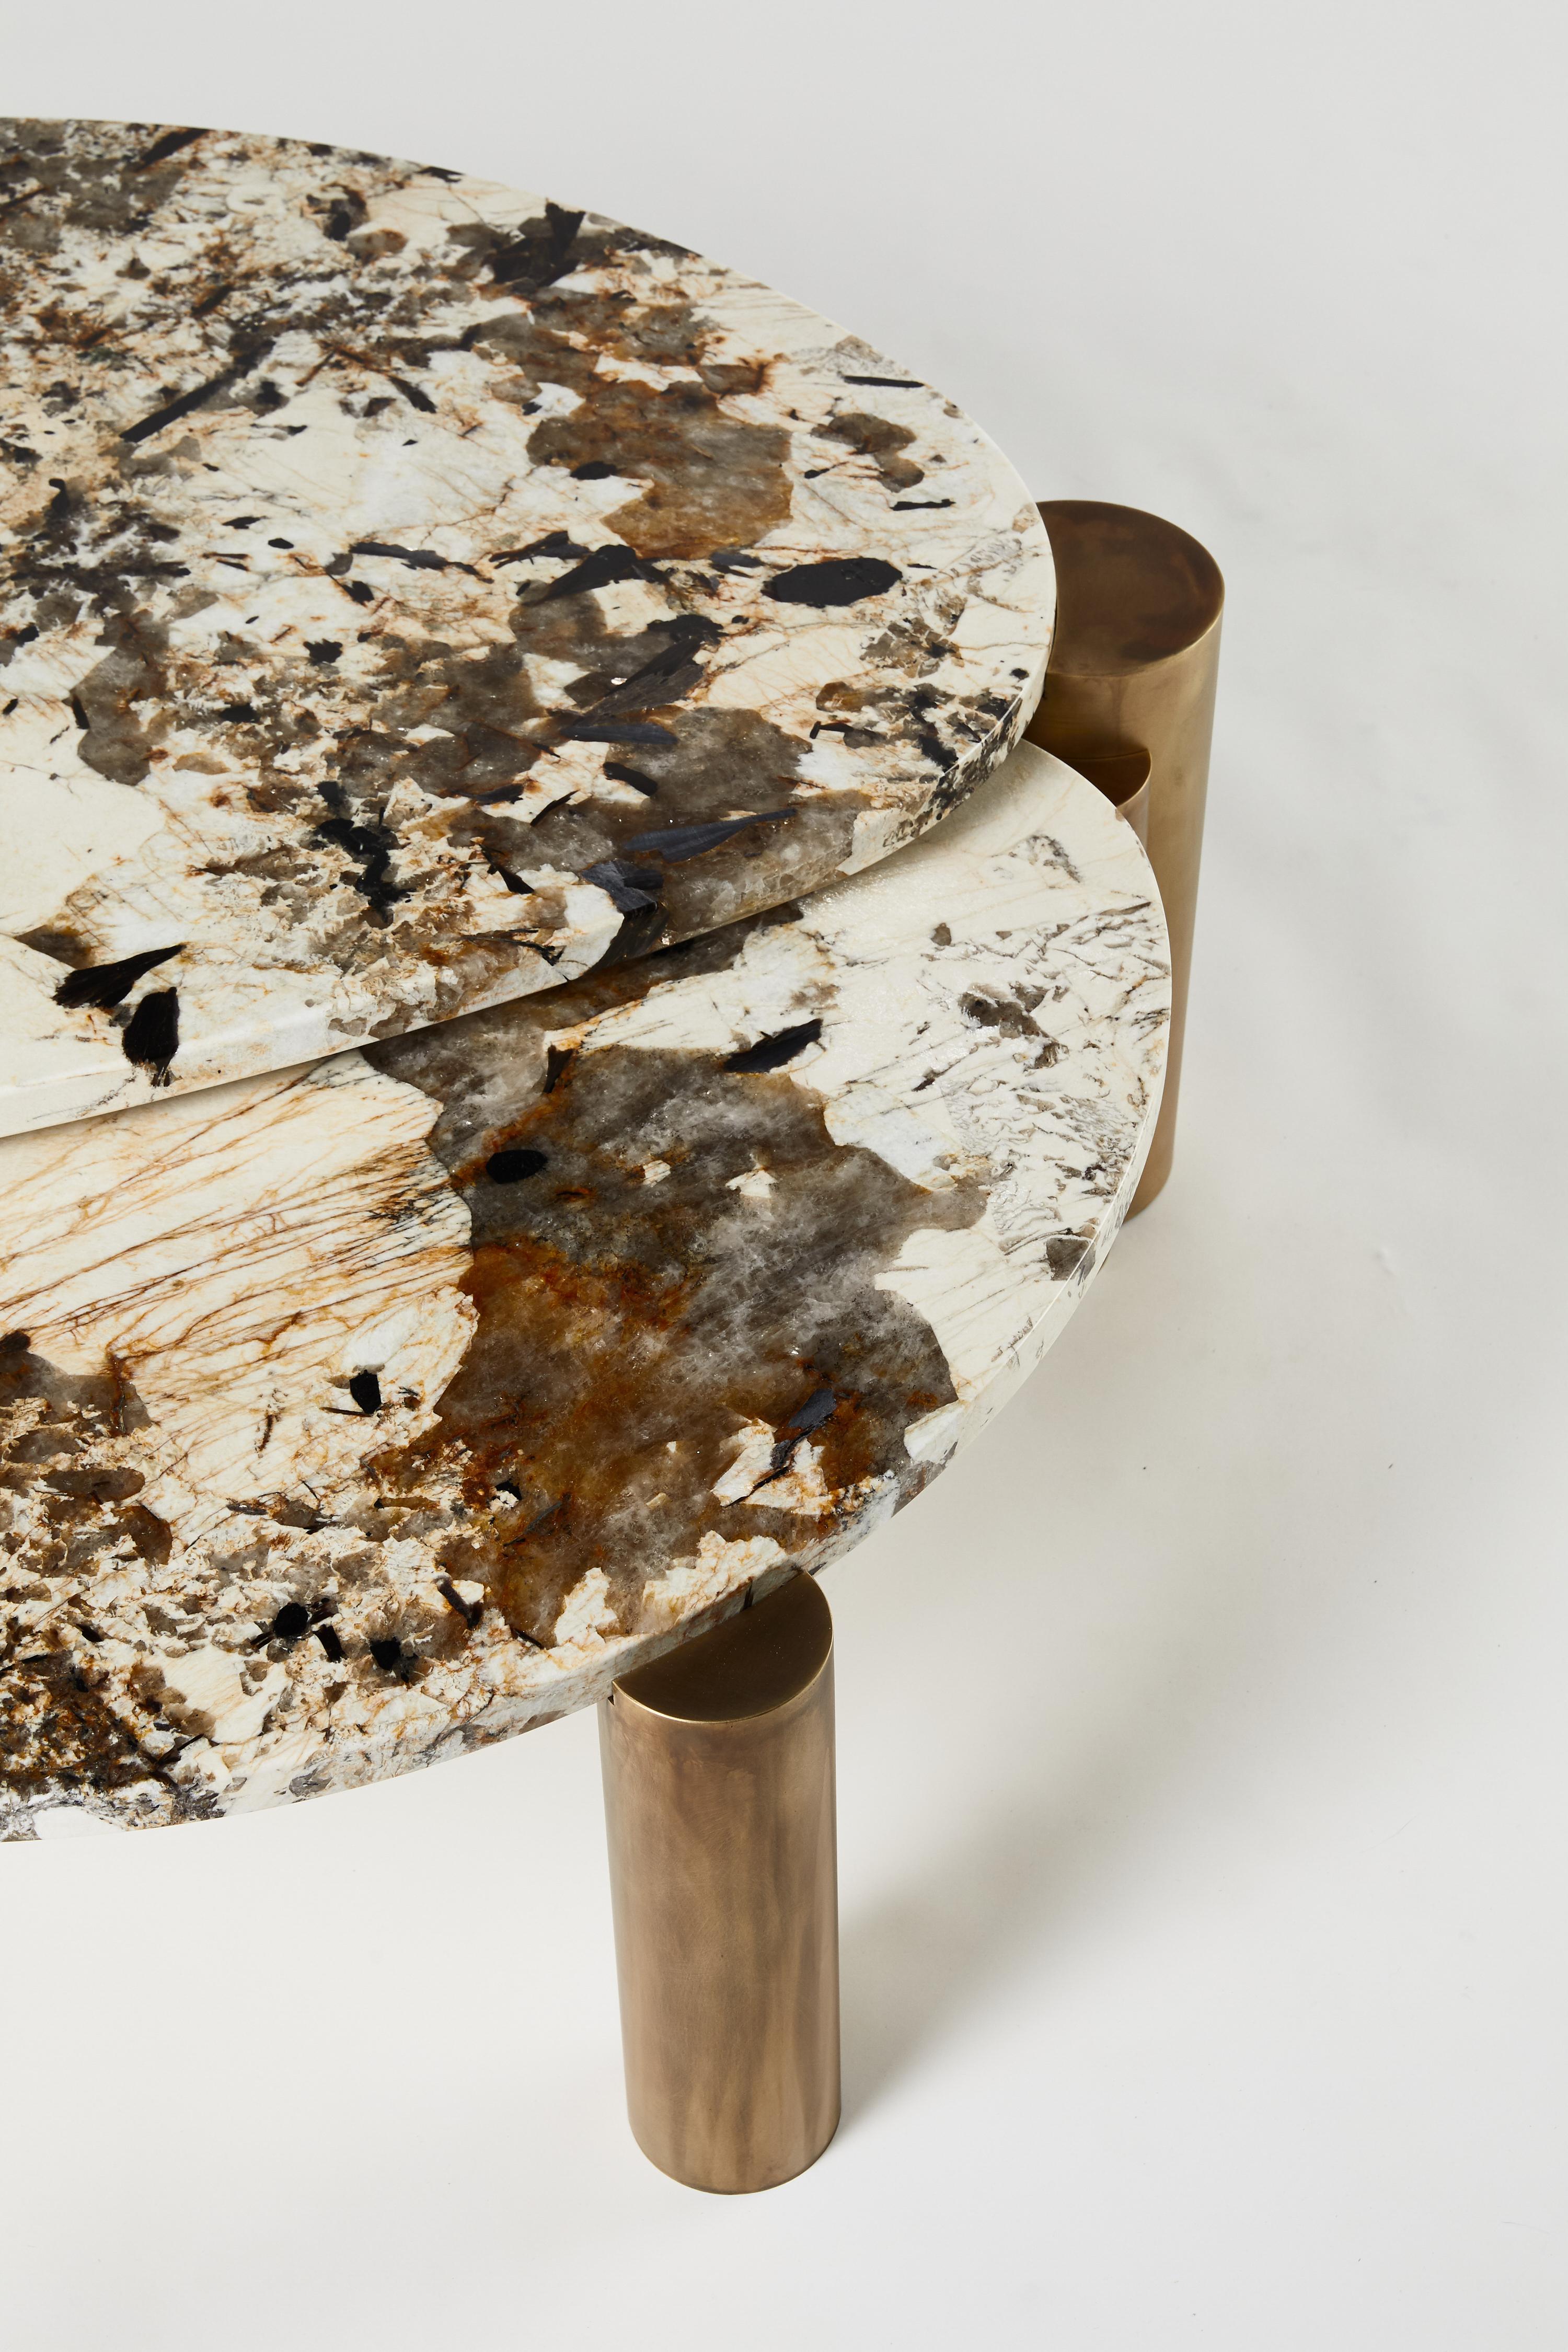 Steel Patagonia Xenolith Table by Ben Barber Studio